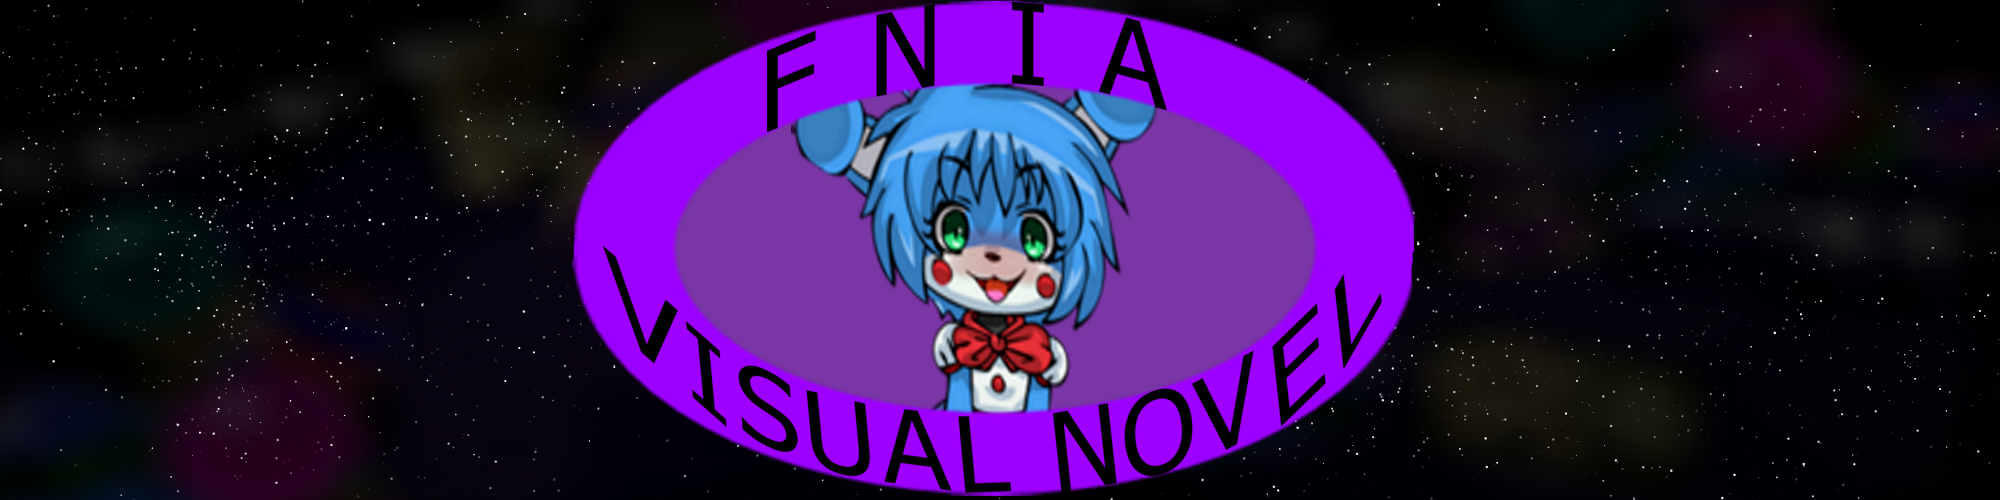 Five Nights in Anime: A New Beginning Update 0.0.8 - The Adventures of Five  Nights in Anime (Season 1): A New Beginning (A Visual Novel) by FNIA Studios